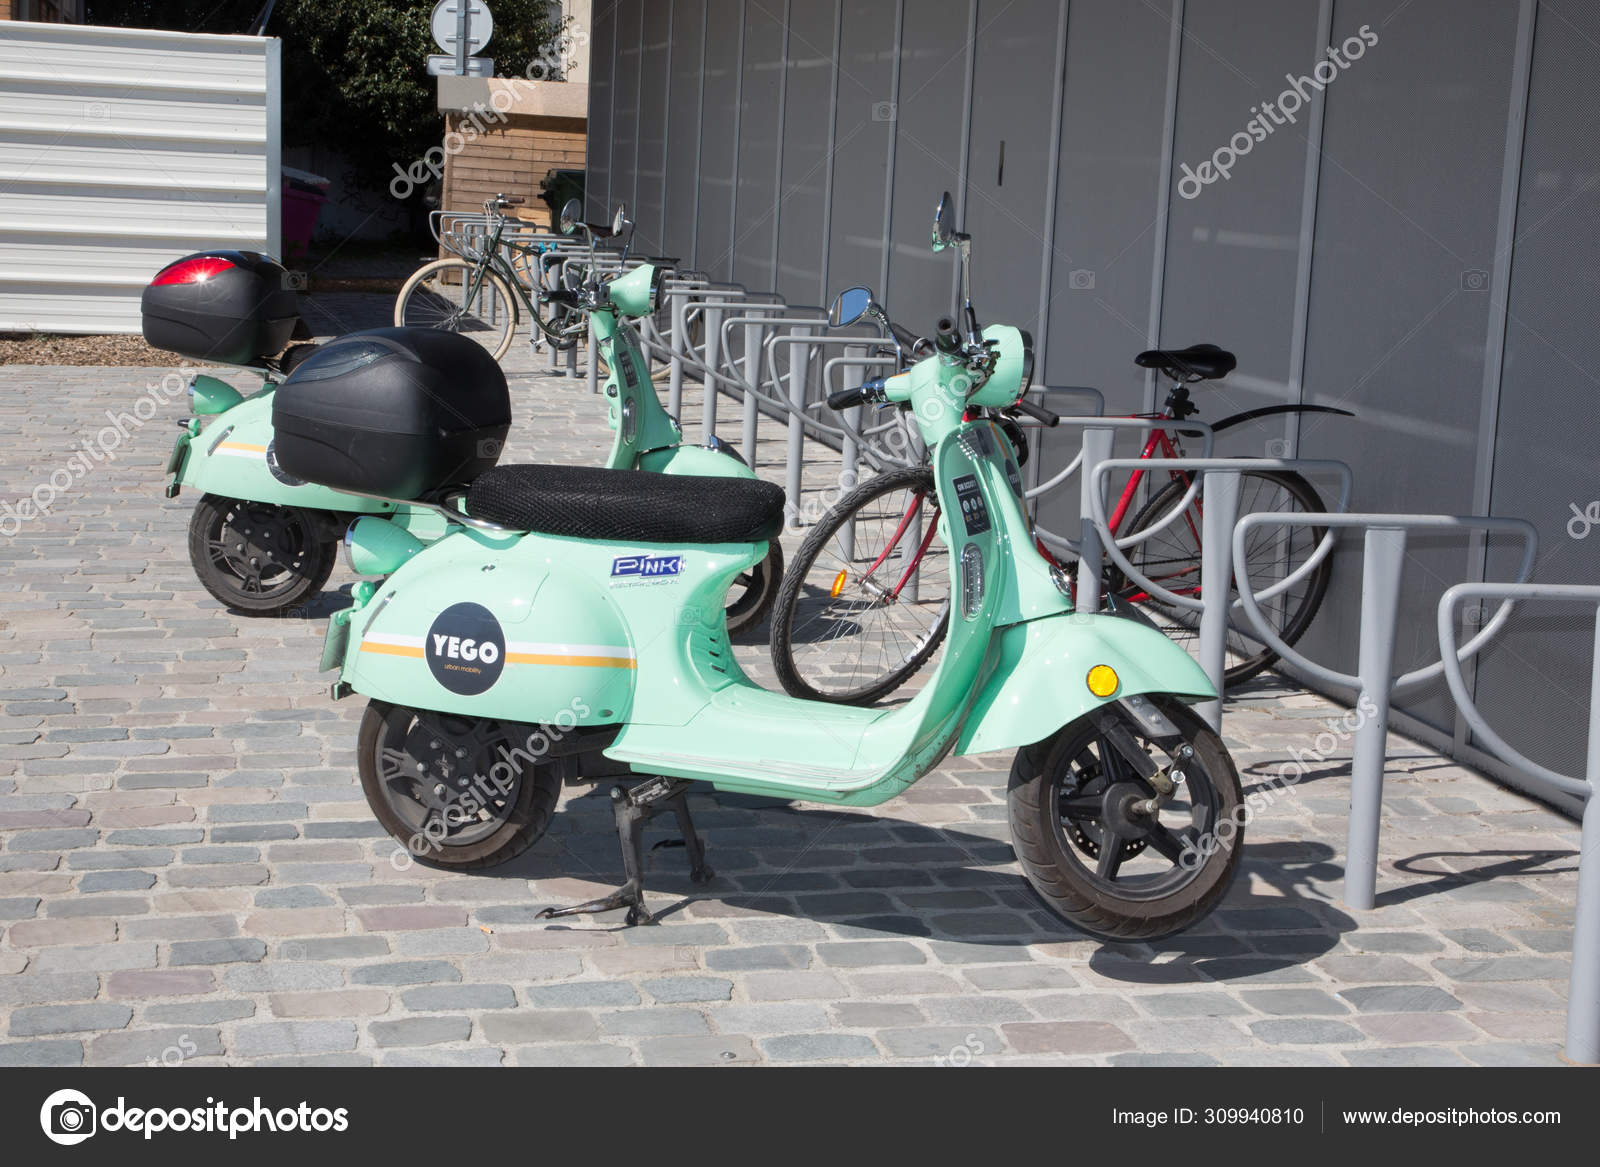 Sportsmand fjende masse Bordeaux Aquitaine France 2019 Yego French Scooter Urban Mobility Scooter –  Stock Editorial Photo © OceanProd #309940810